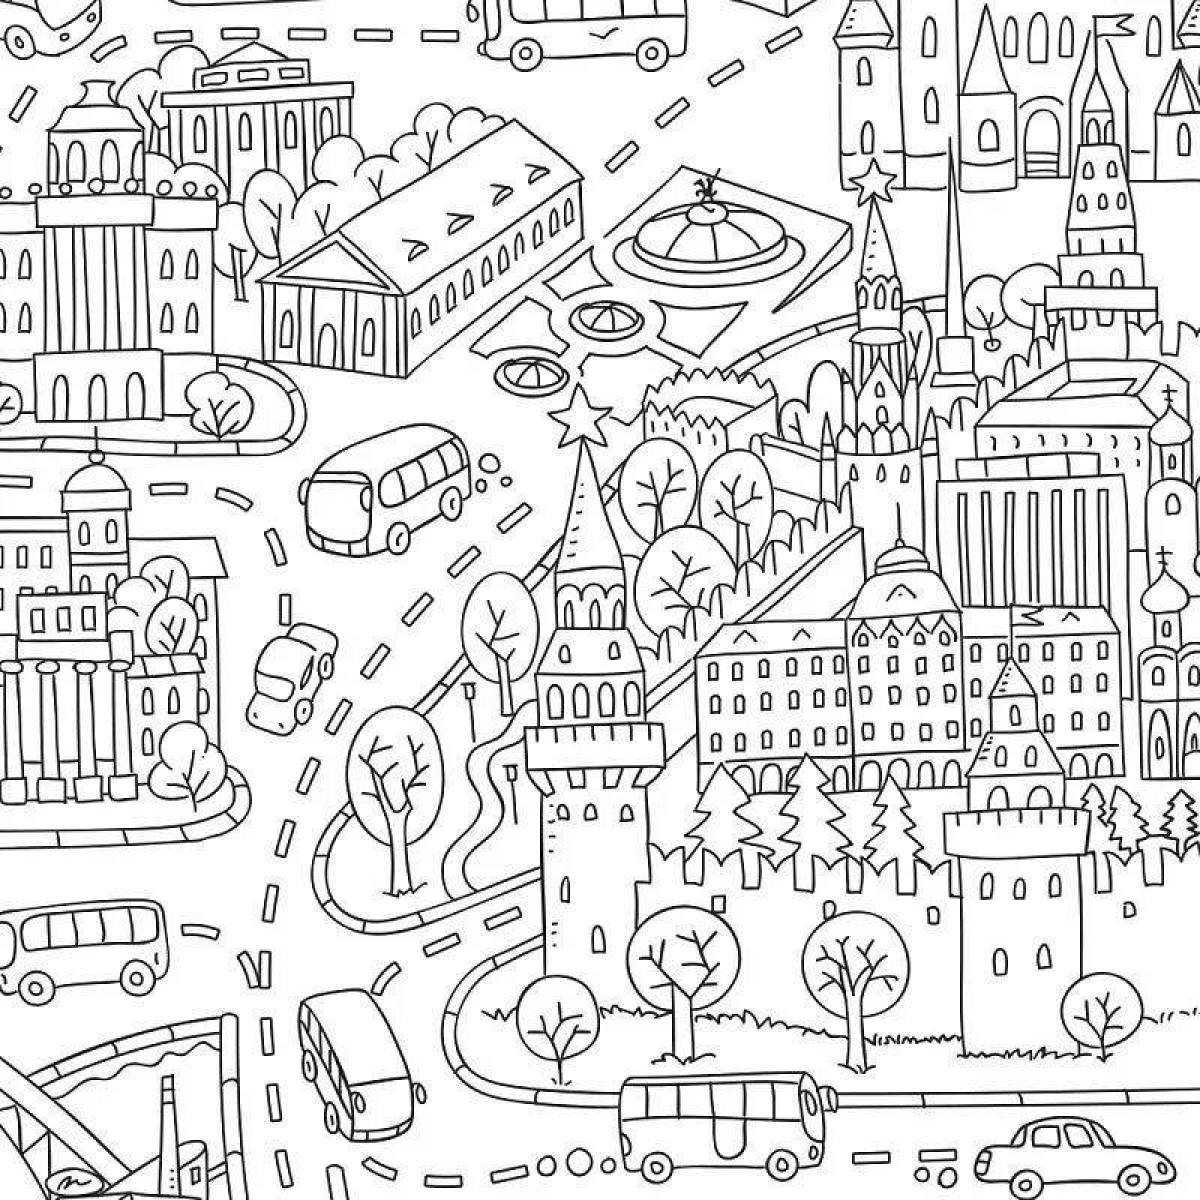 Exciting city map coloring page